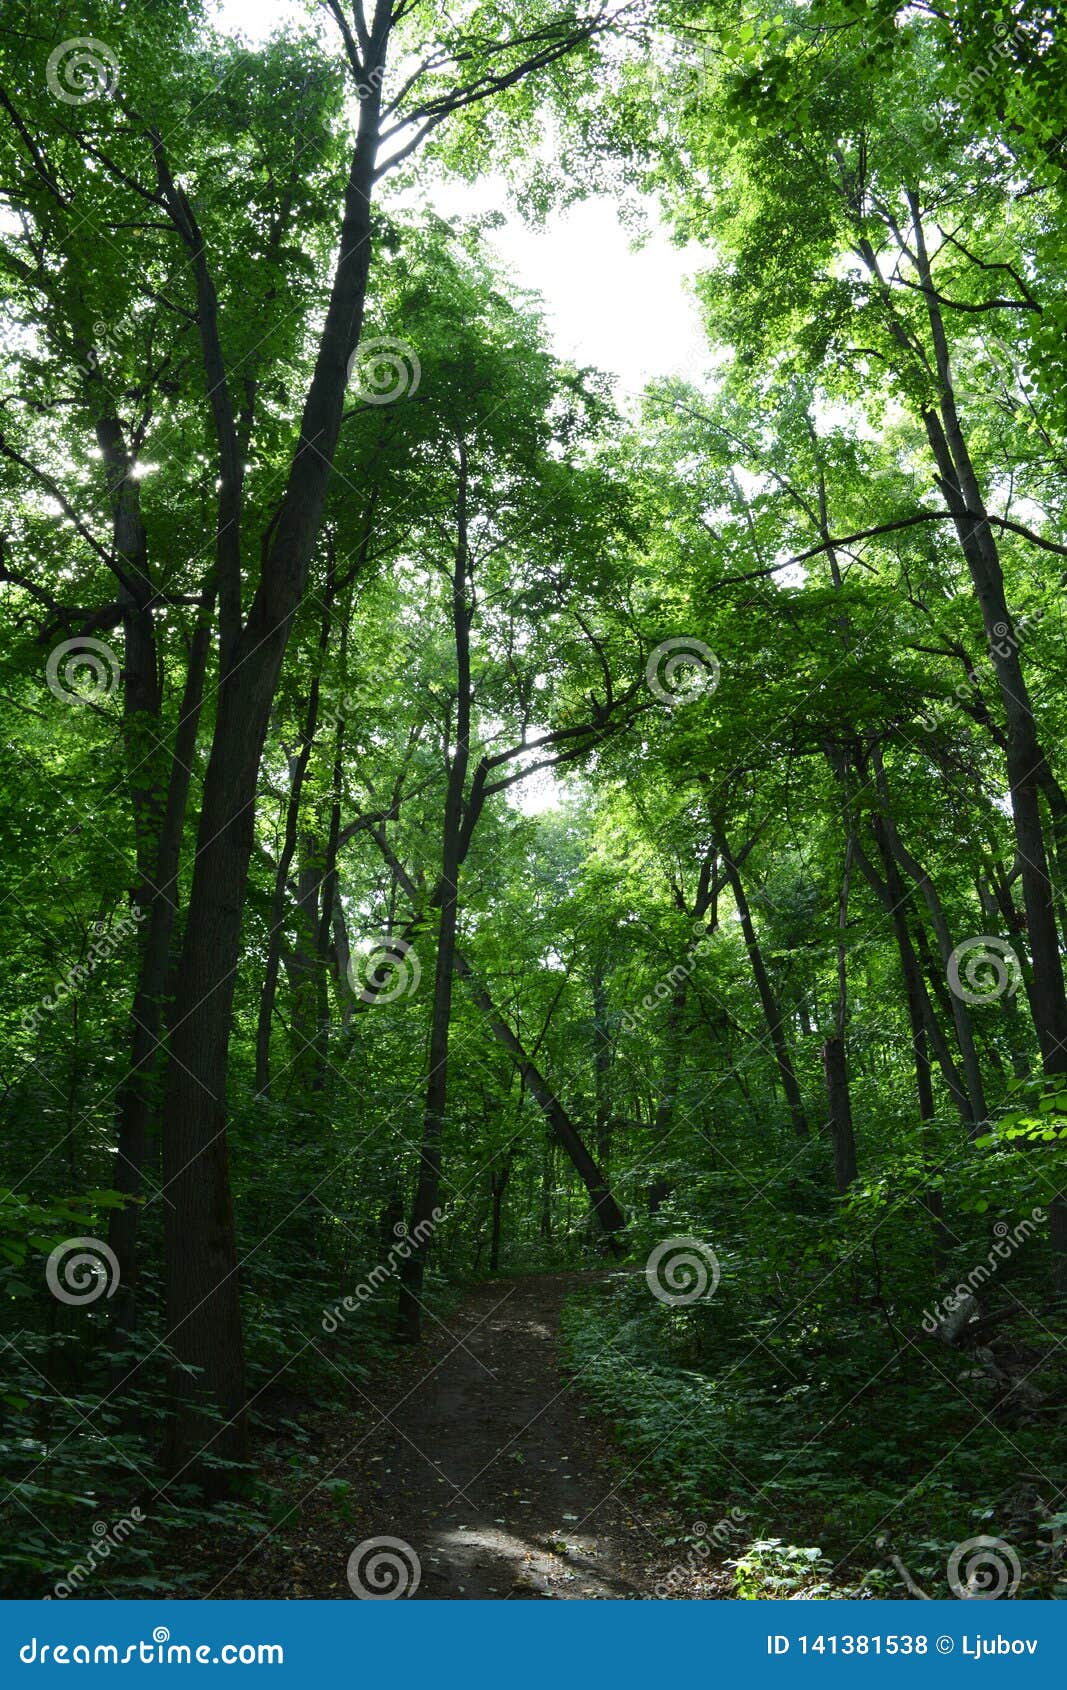 unexplored path in lush forest. tall deciduous trees with green foliage